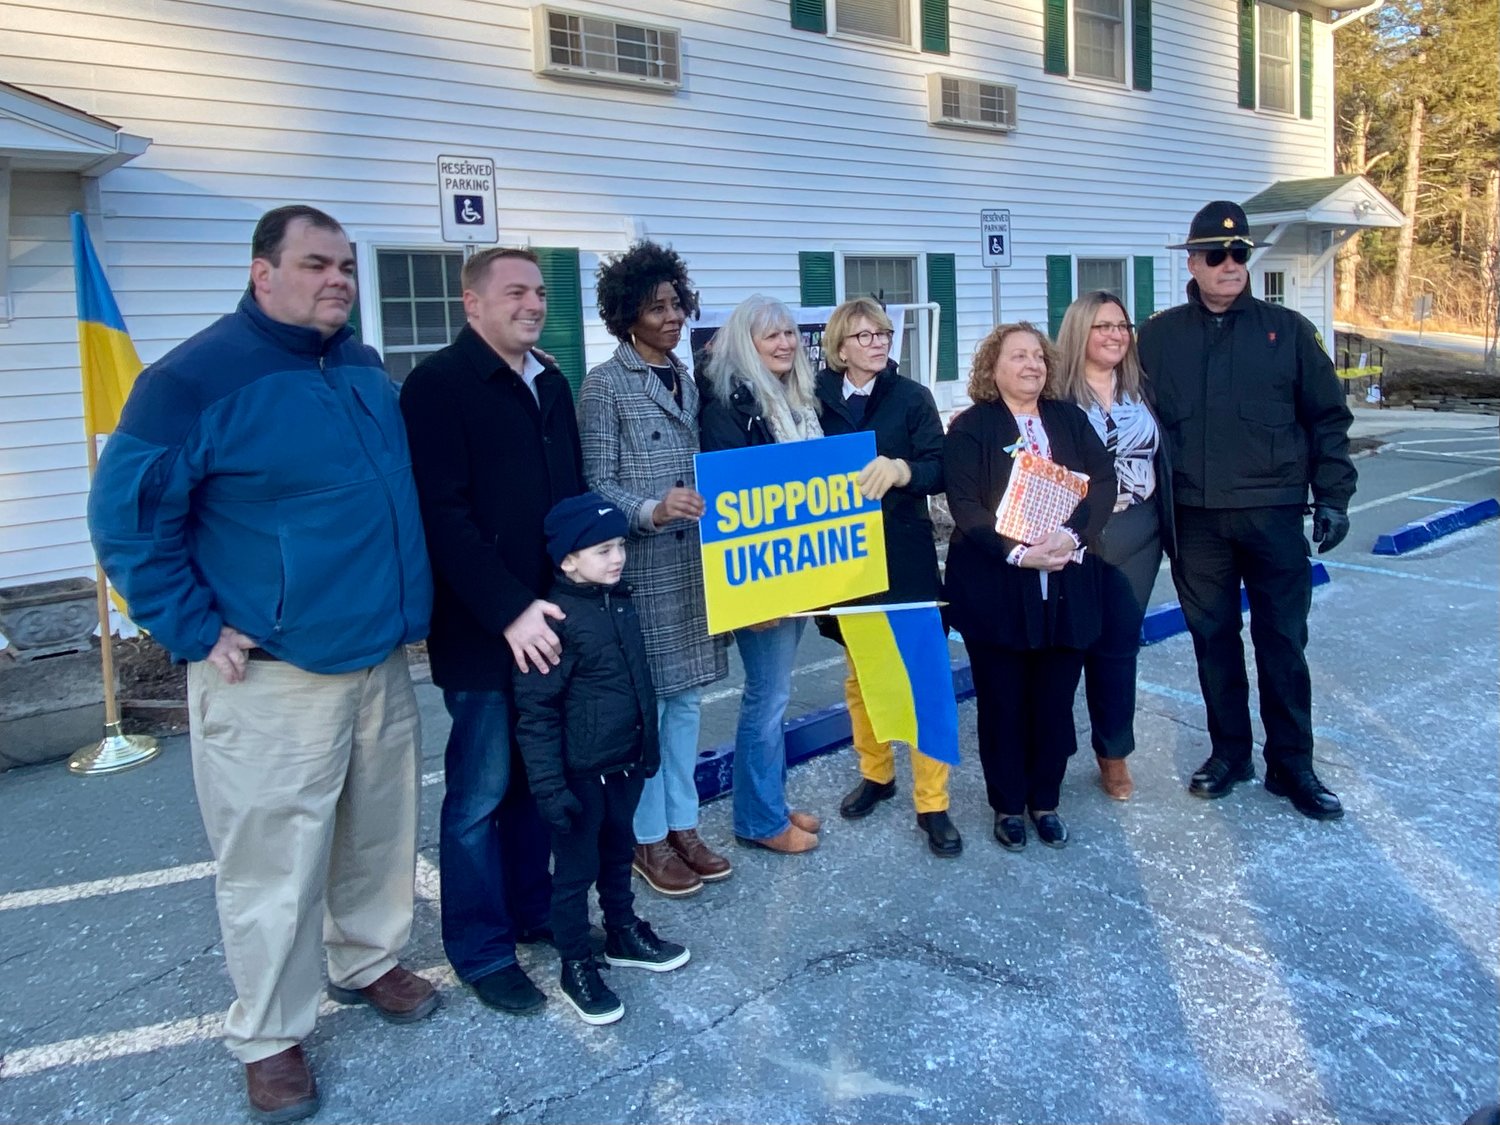 State and county officials— legisltive chair Rob Doherty, Senator Mike Martucci, human rights commissioner Adrienne Jensen, treasurer Nancy Buck, Assemblywoman Aileen Gunther, legislator Nadia Rajsz, district attorney Meagan Galligan, and sheriff Mike Shiff—stand in solidarity with the people of Ukraine.